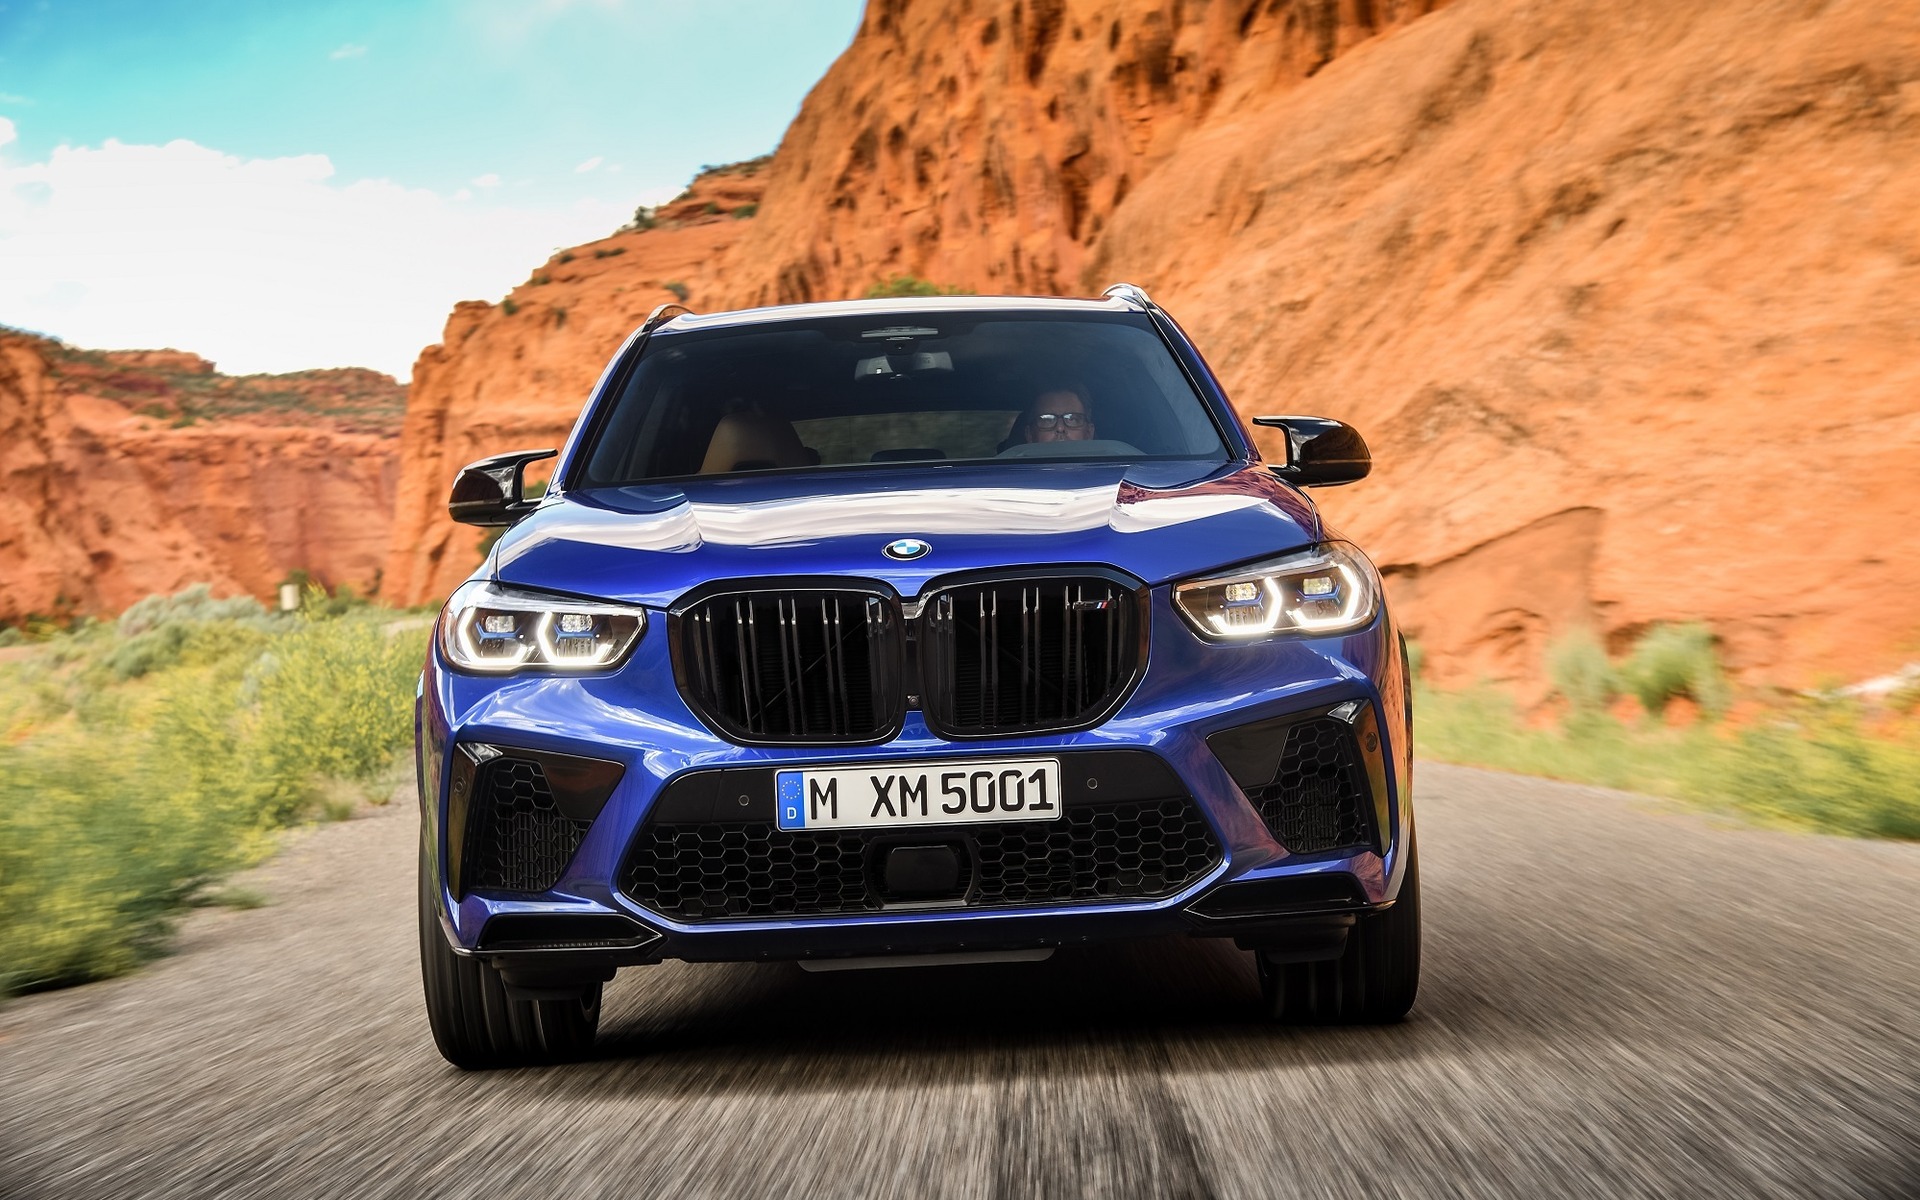 2020 Bmw X5 M And X6 M Debut With Up To 617 Horsepower The